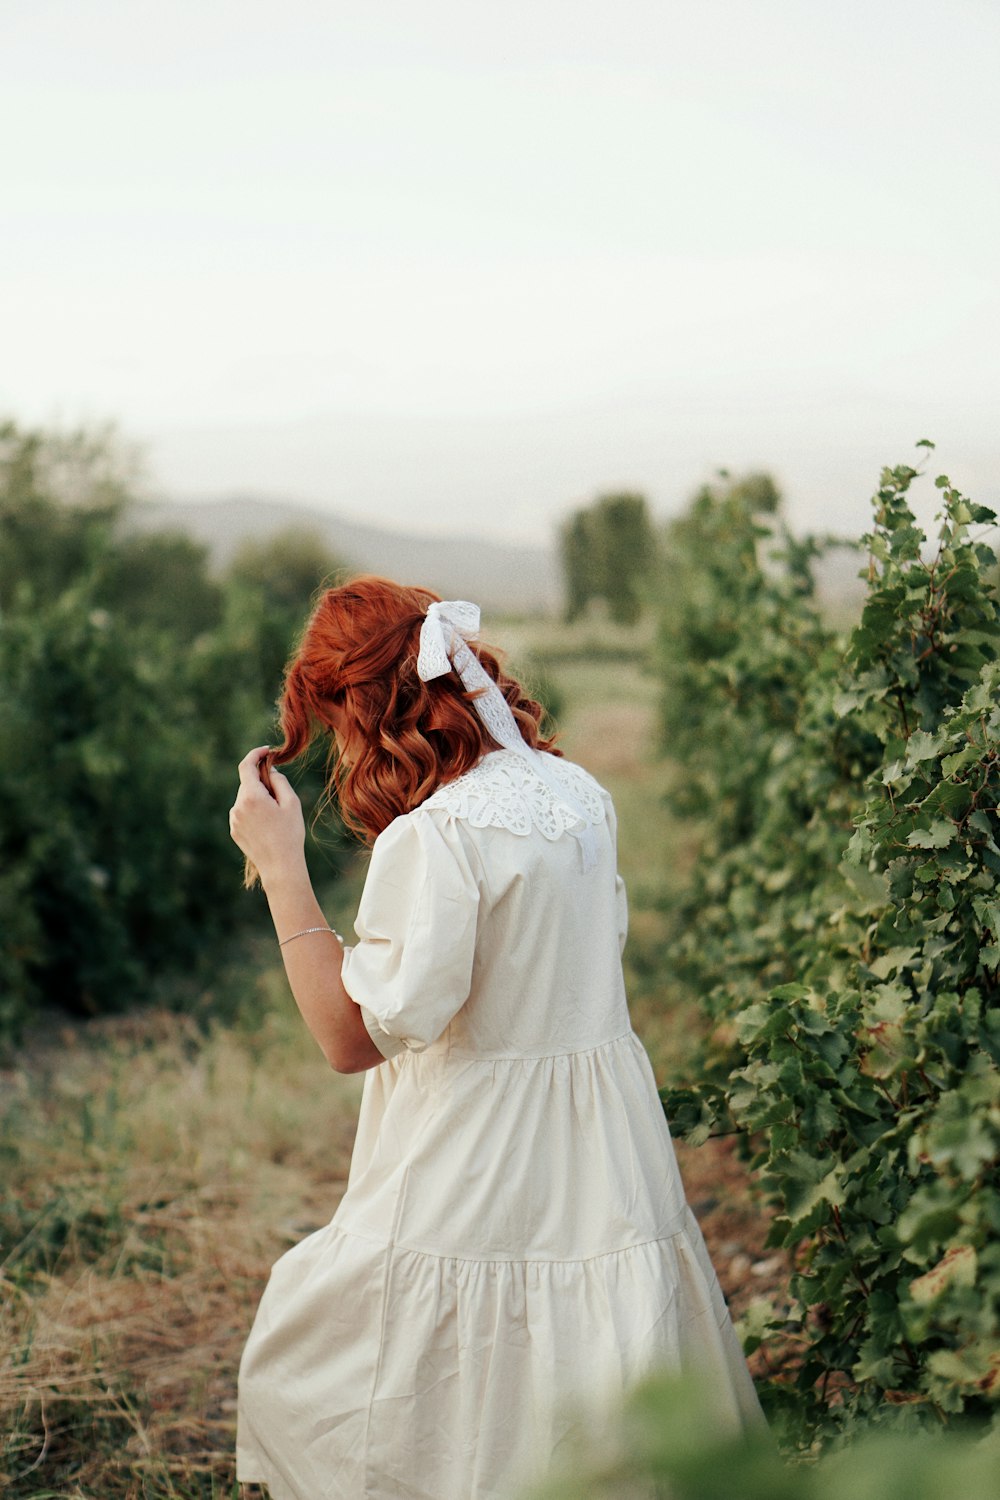 a woman in a white dress standing in a field